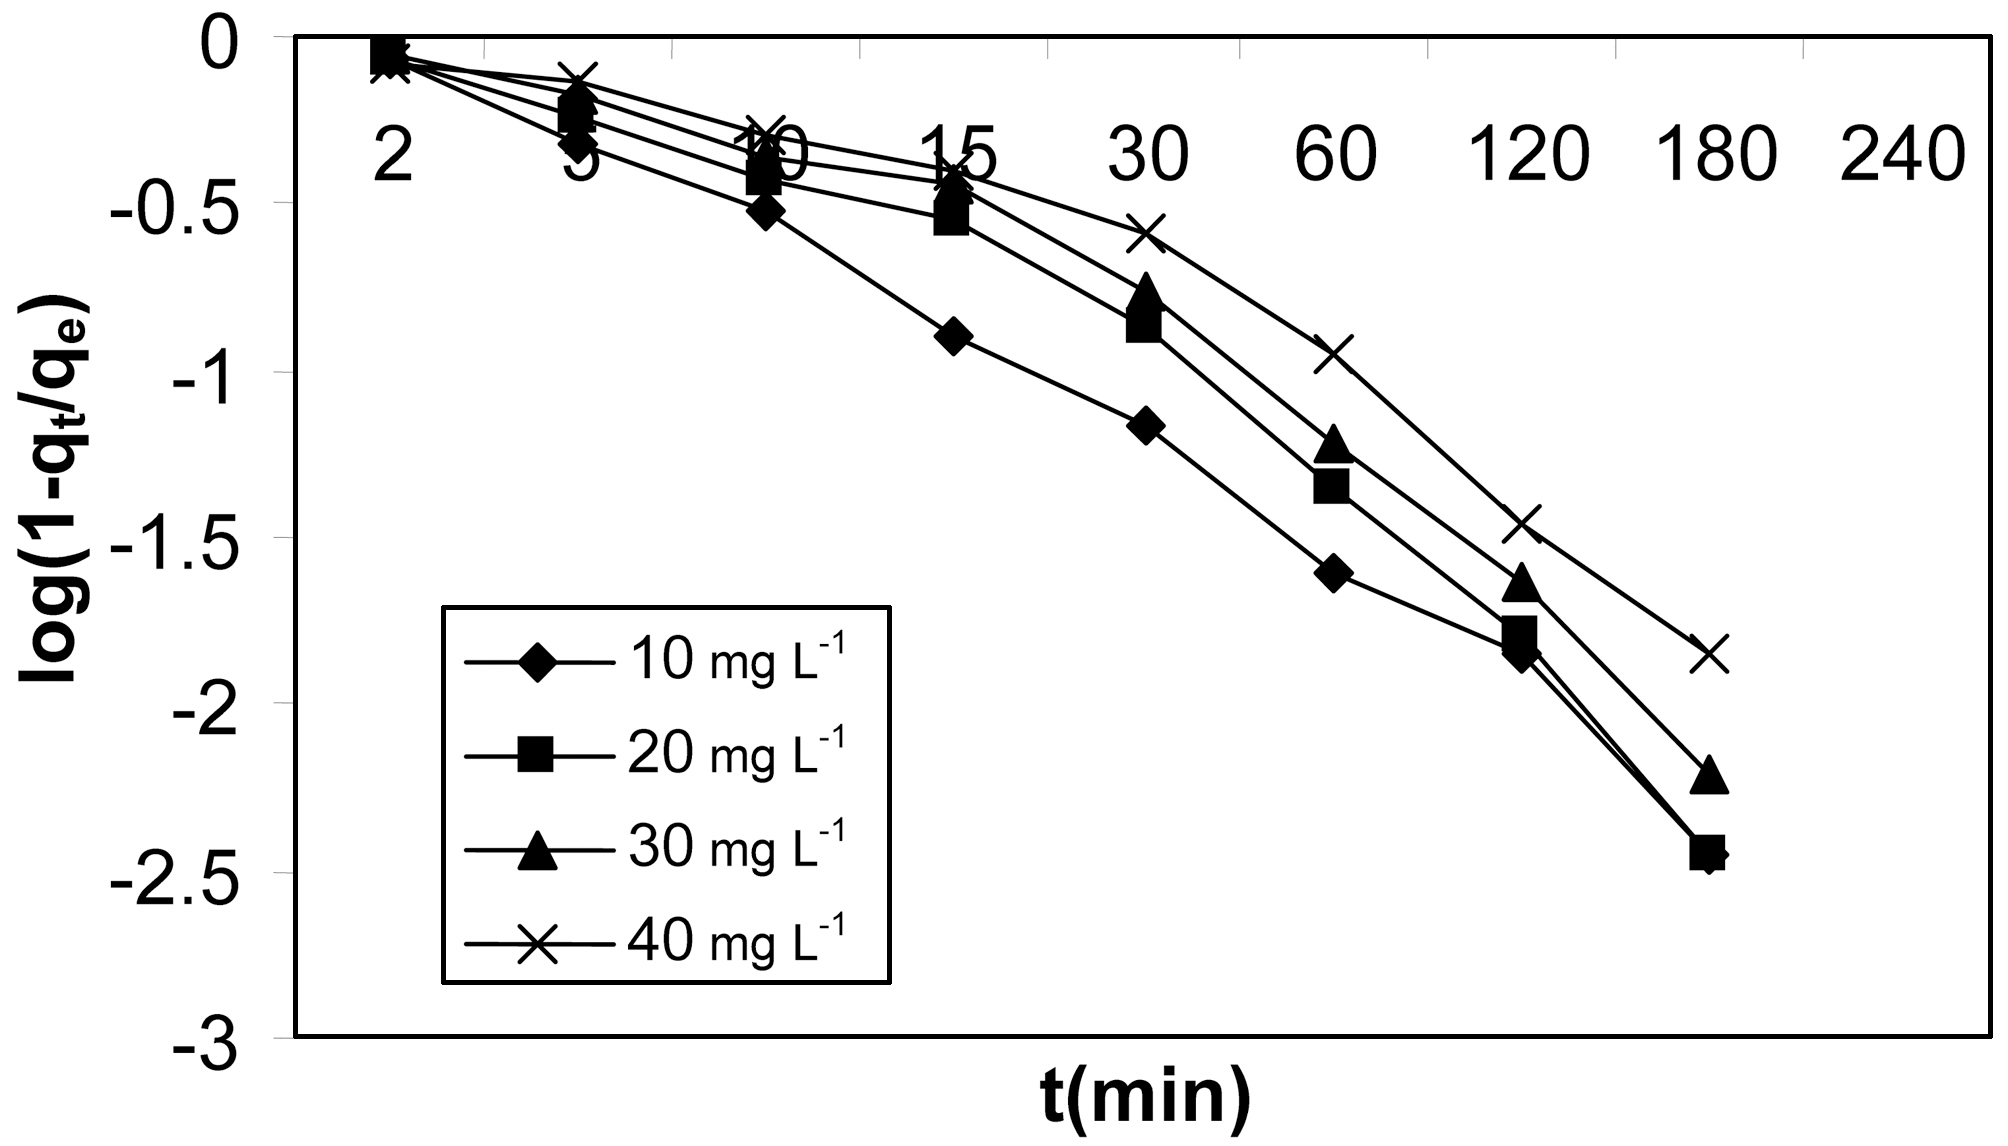 McKay plot for the adsorption of resorcinol forMOAC1 activated carbon.